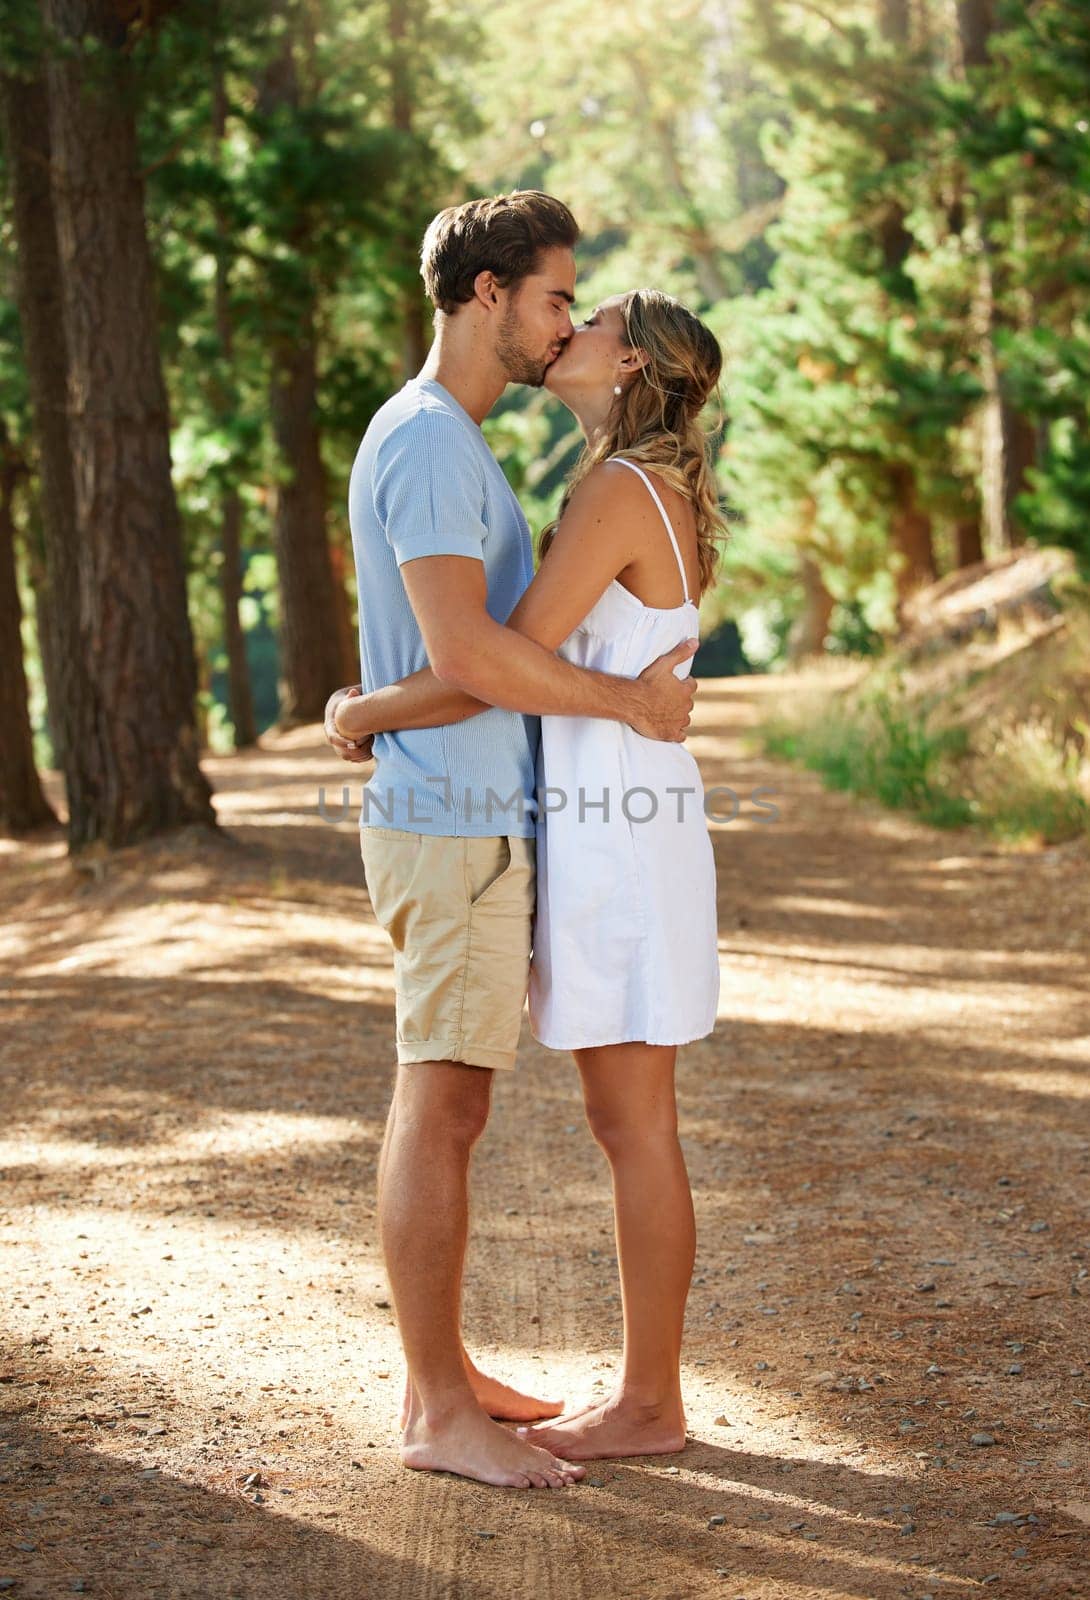 Couple kiss, love and hug in forest, summer with freedom and adventure, relationship with affection and care outdoor. People together in nature park, commitment and trust with romance and bonding.